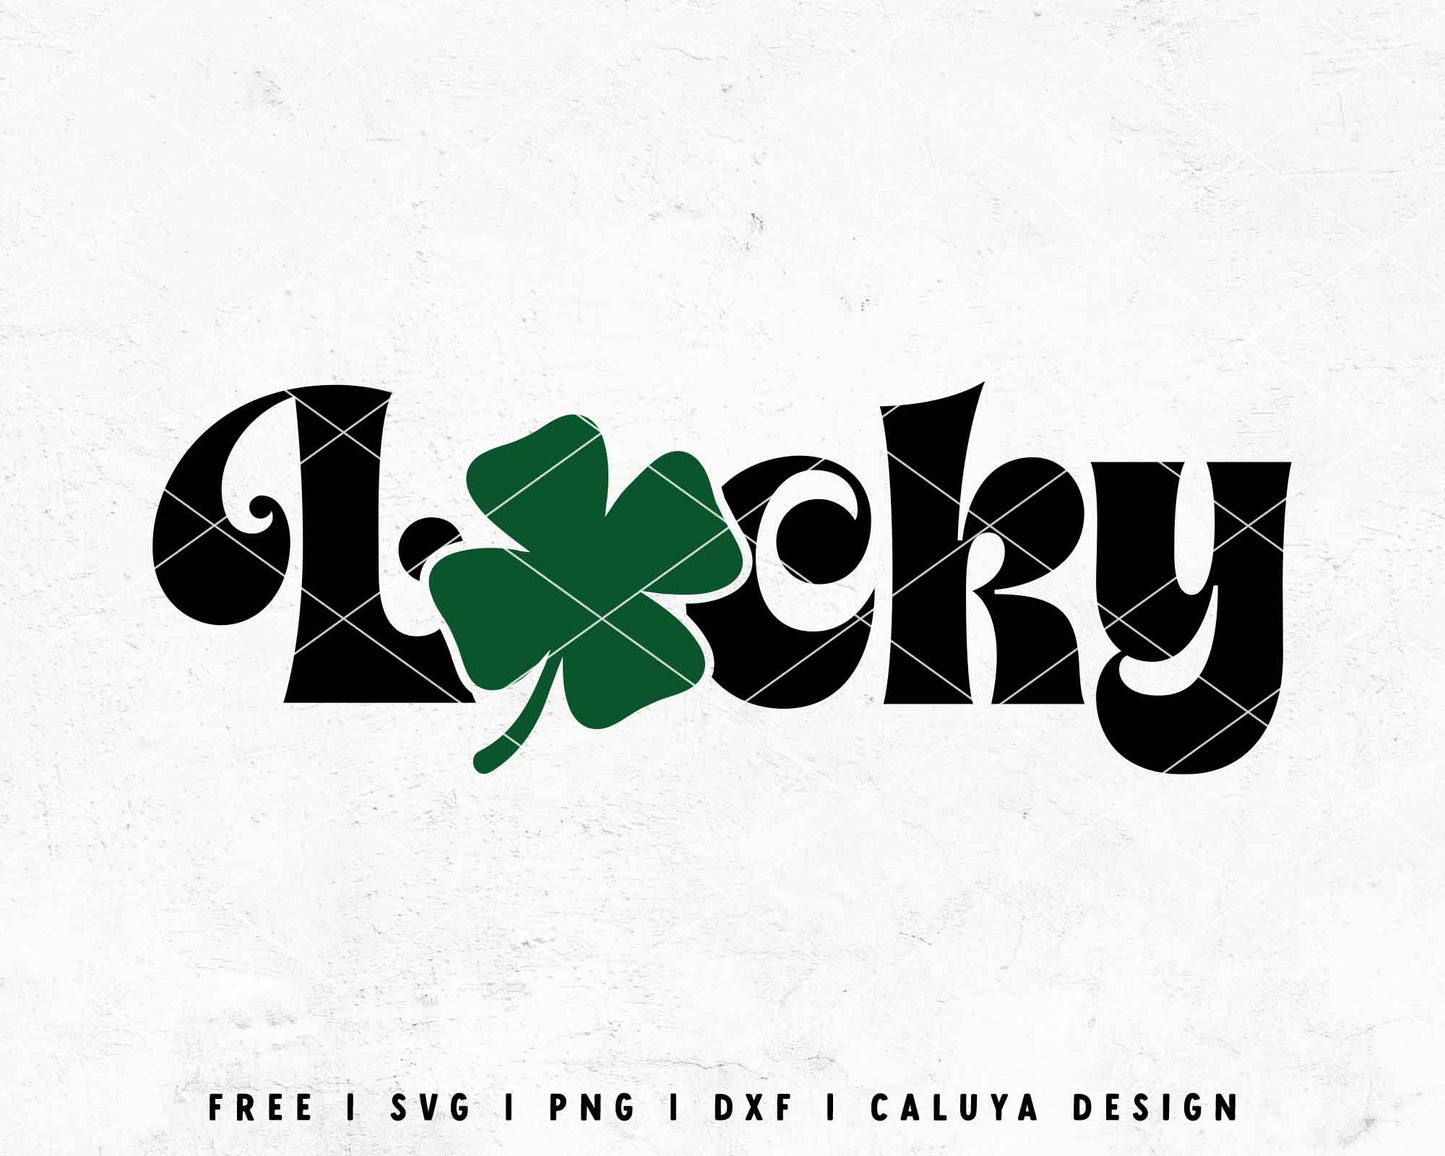 FREE Lucky | St Patricks Day SVG Cut File for Cricut, Cameo Silhouette | Free SVG Cut File